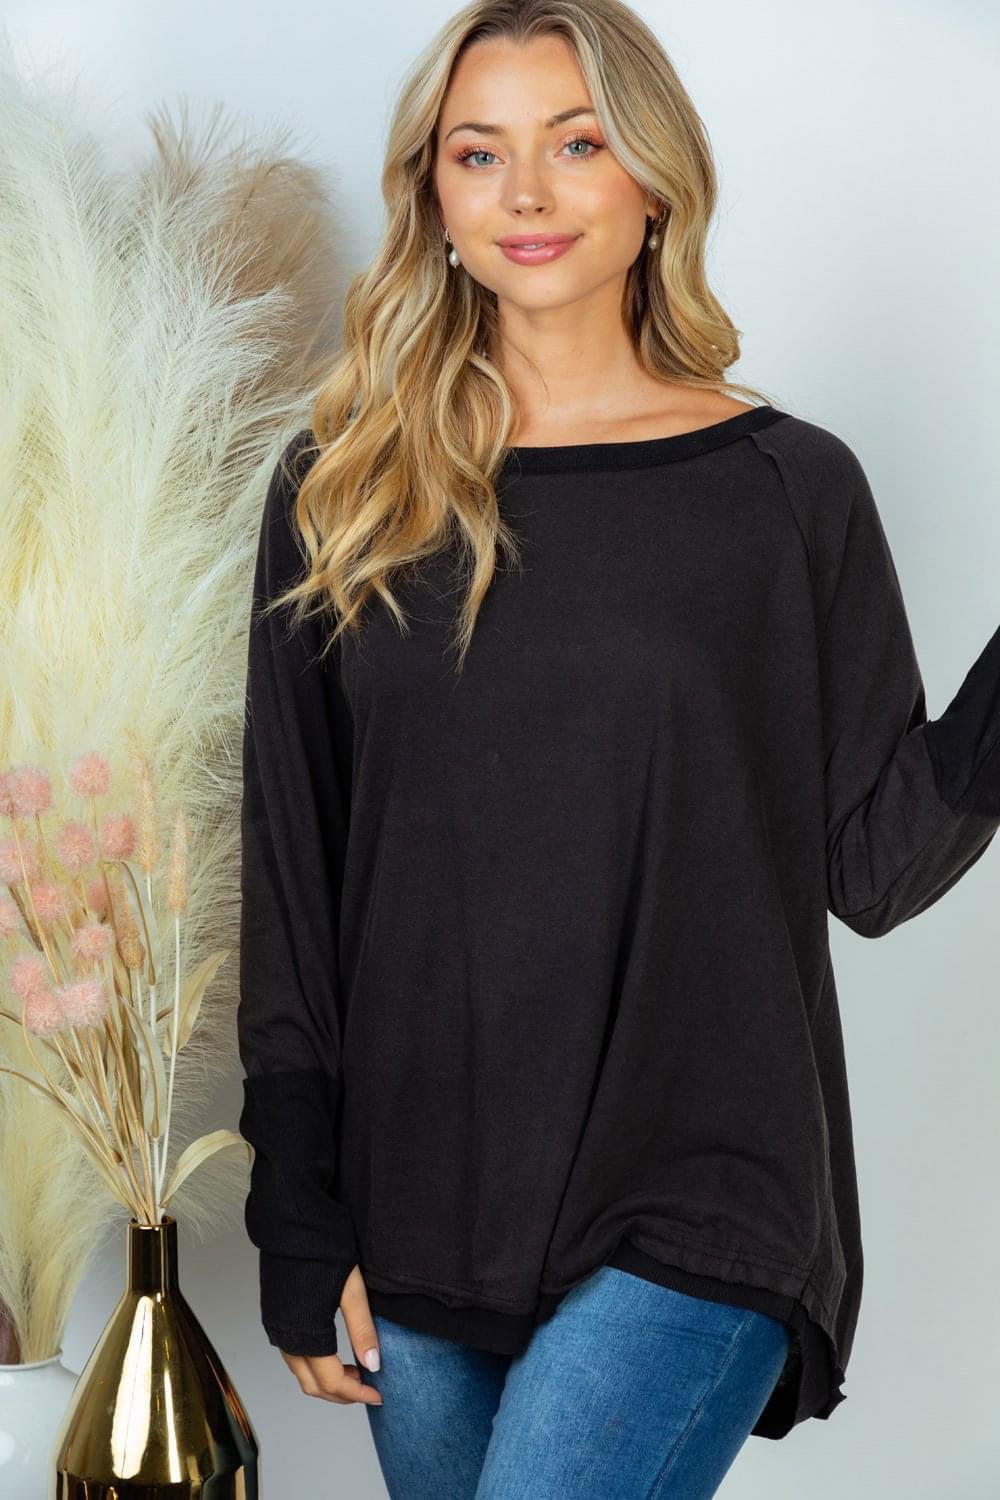 White Birch Washed Thumbhole Top in Black